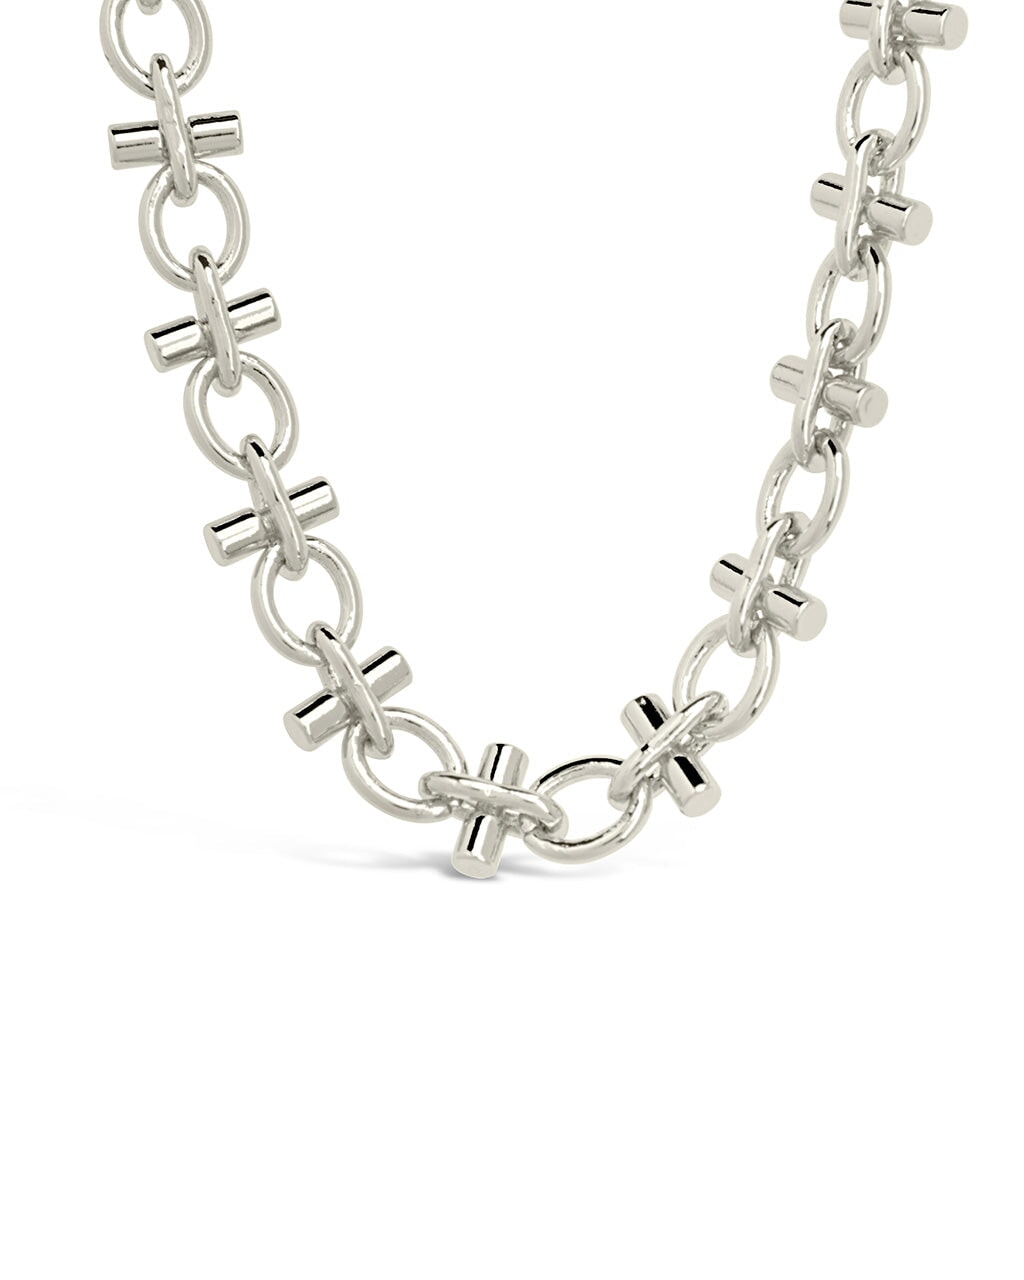 Amaya Chain Necklace Necklace Sterling Forever Silver 